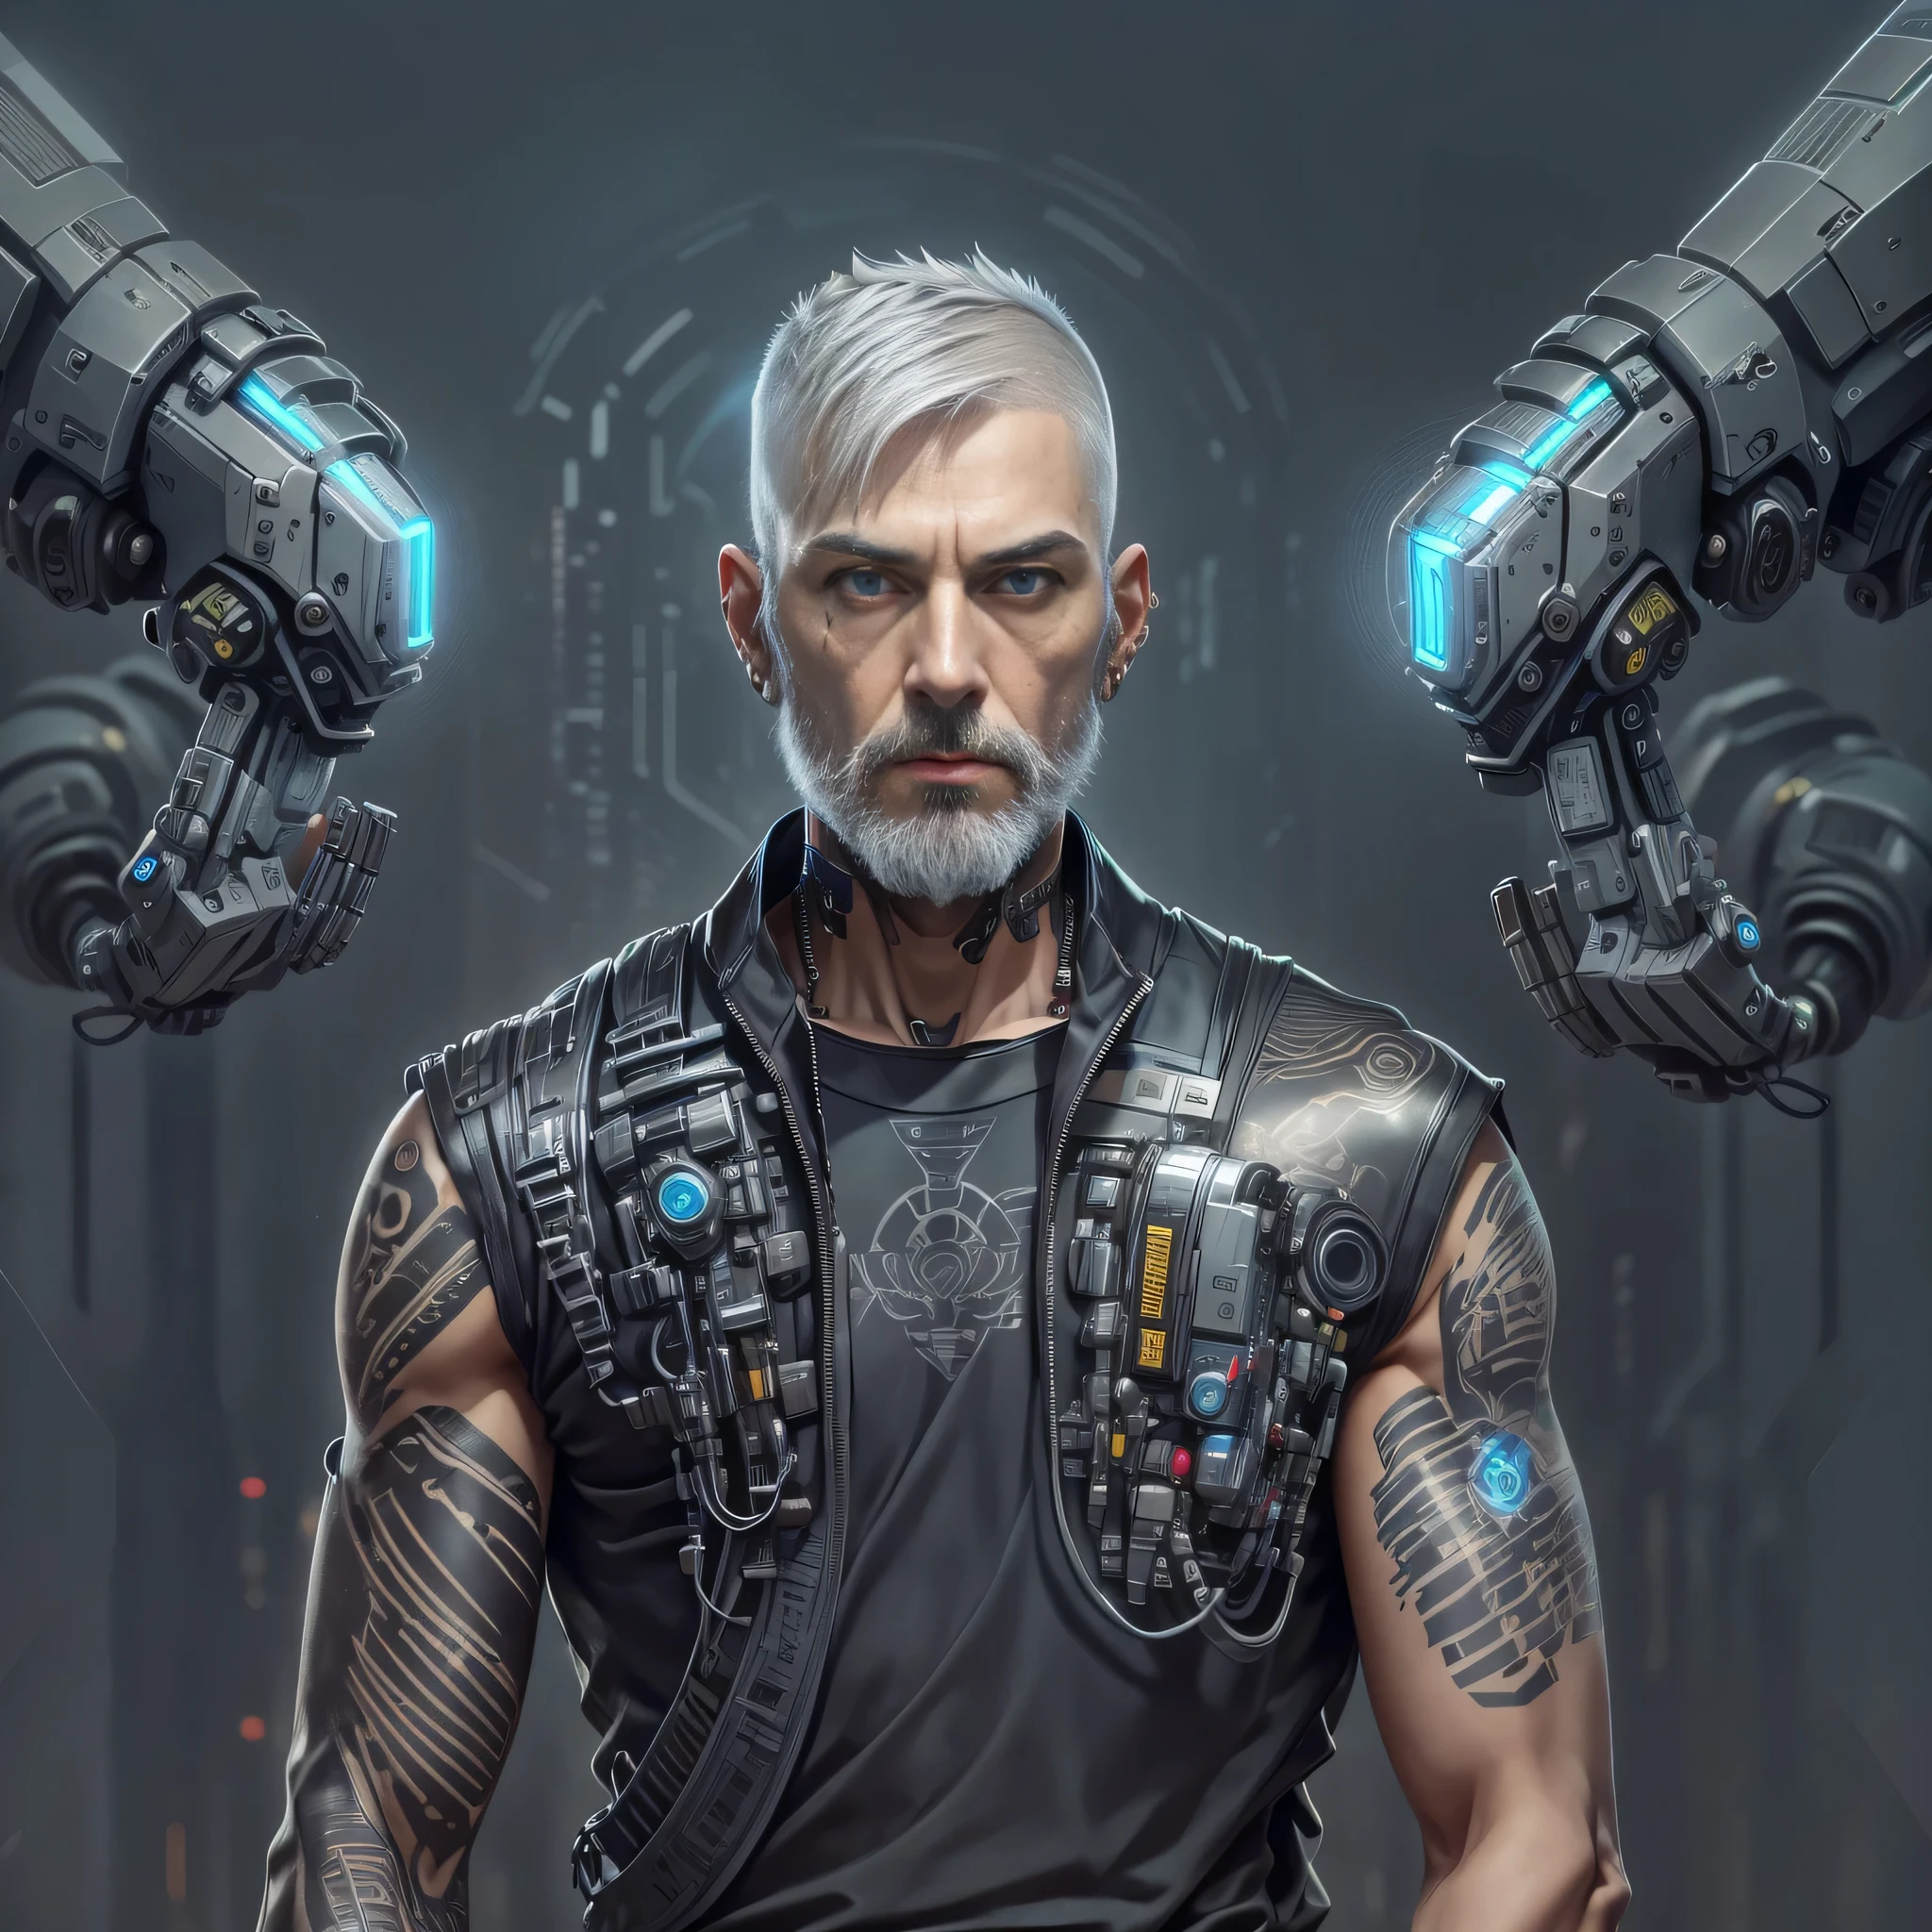 thin man, serious face, male,gray hair, short beard, with cybernetic arm, robotic arm, with robotic prosthesis,implants on face,wearing comfortable clothes, jeans cinza, camisa regata cinza, t-shirt, shirt, tattoo on upper arm,with all hair shaved, very short hair, full body, cyberpunk, dark cyberpunk, futuristic.